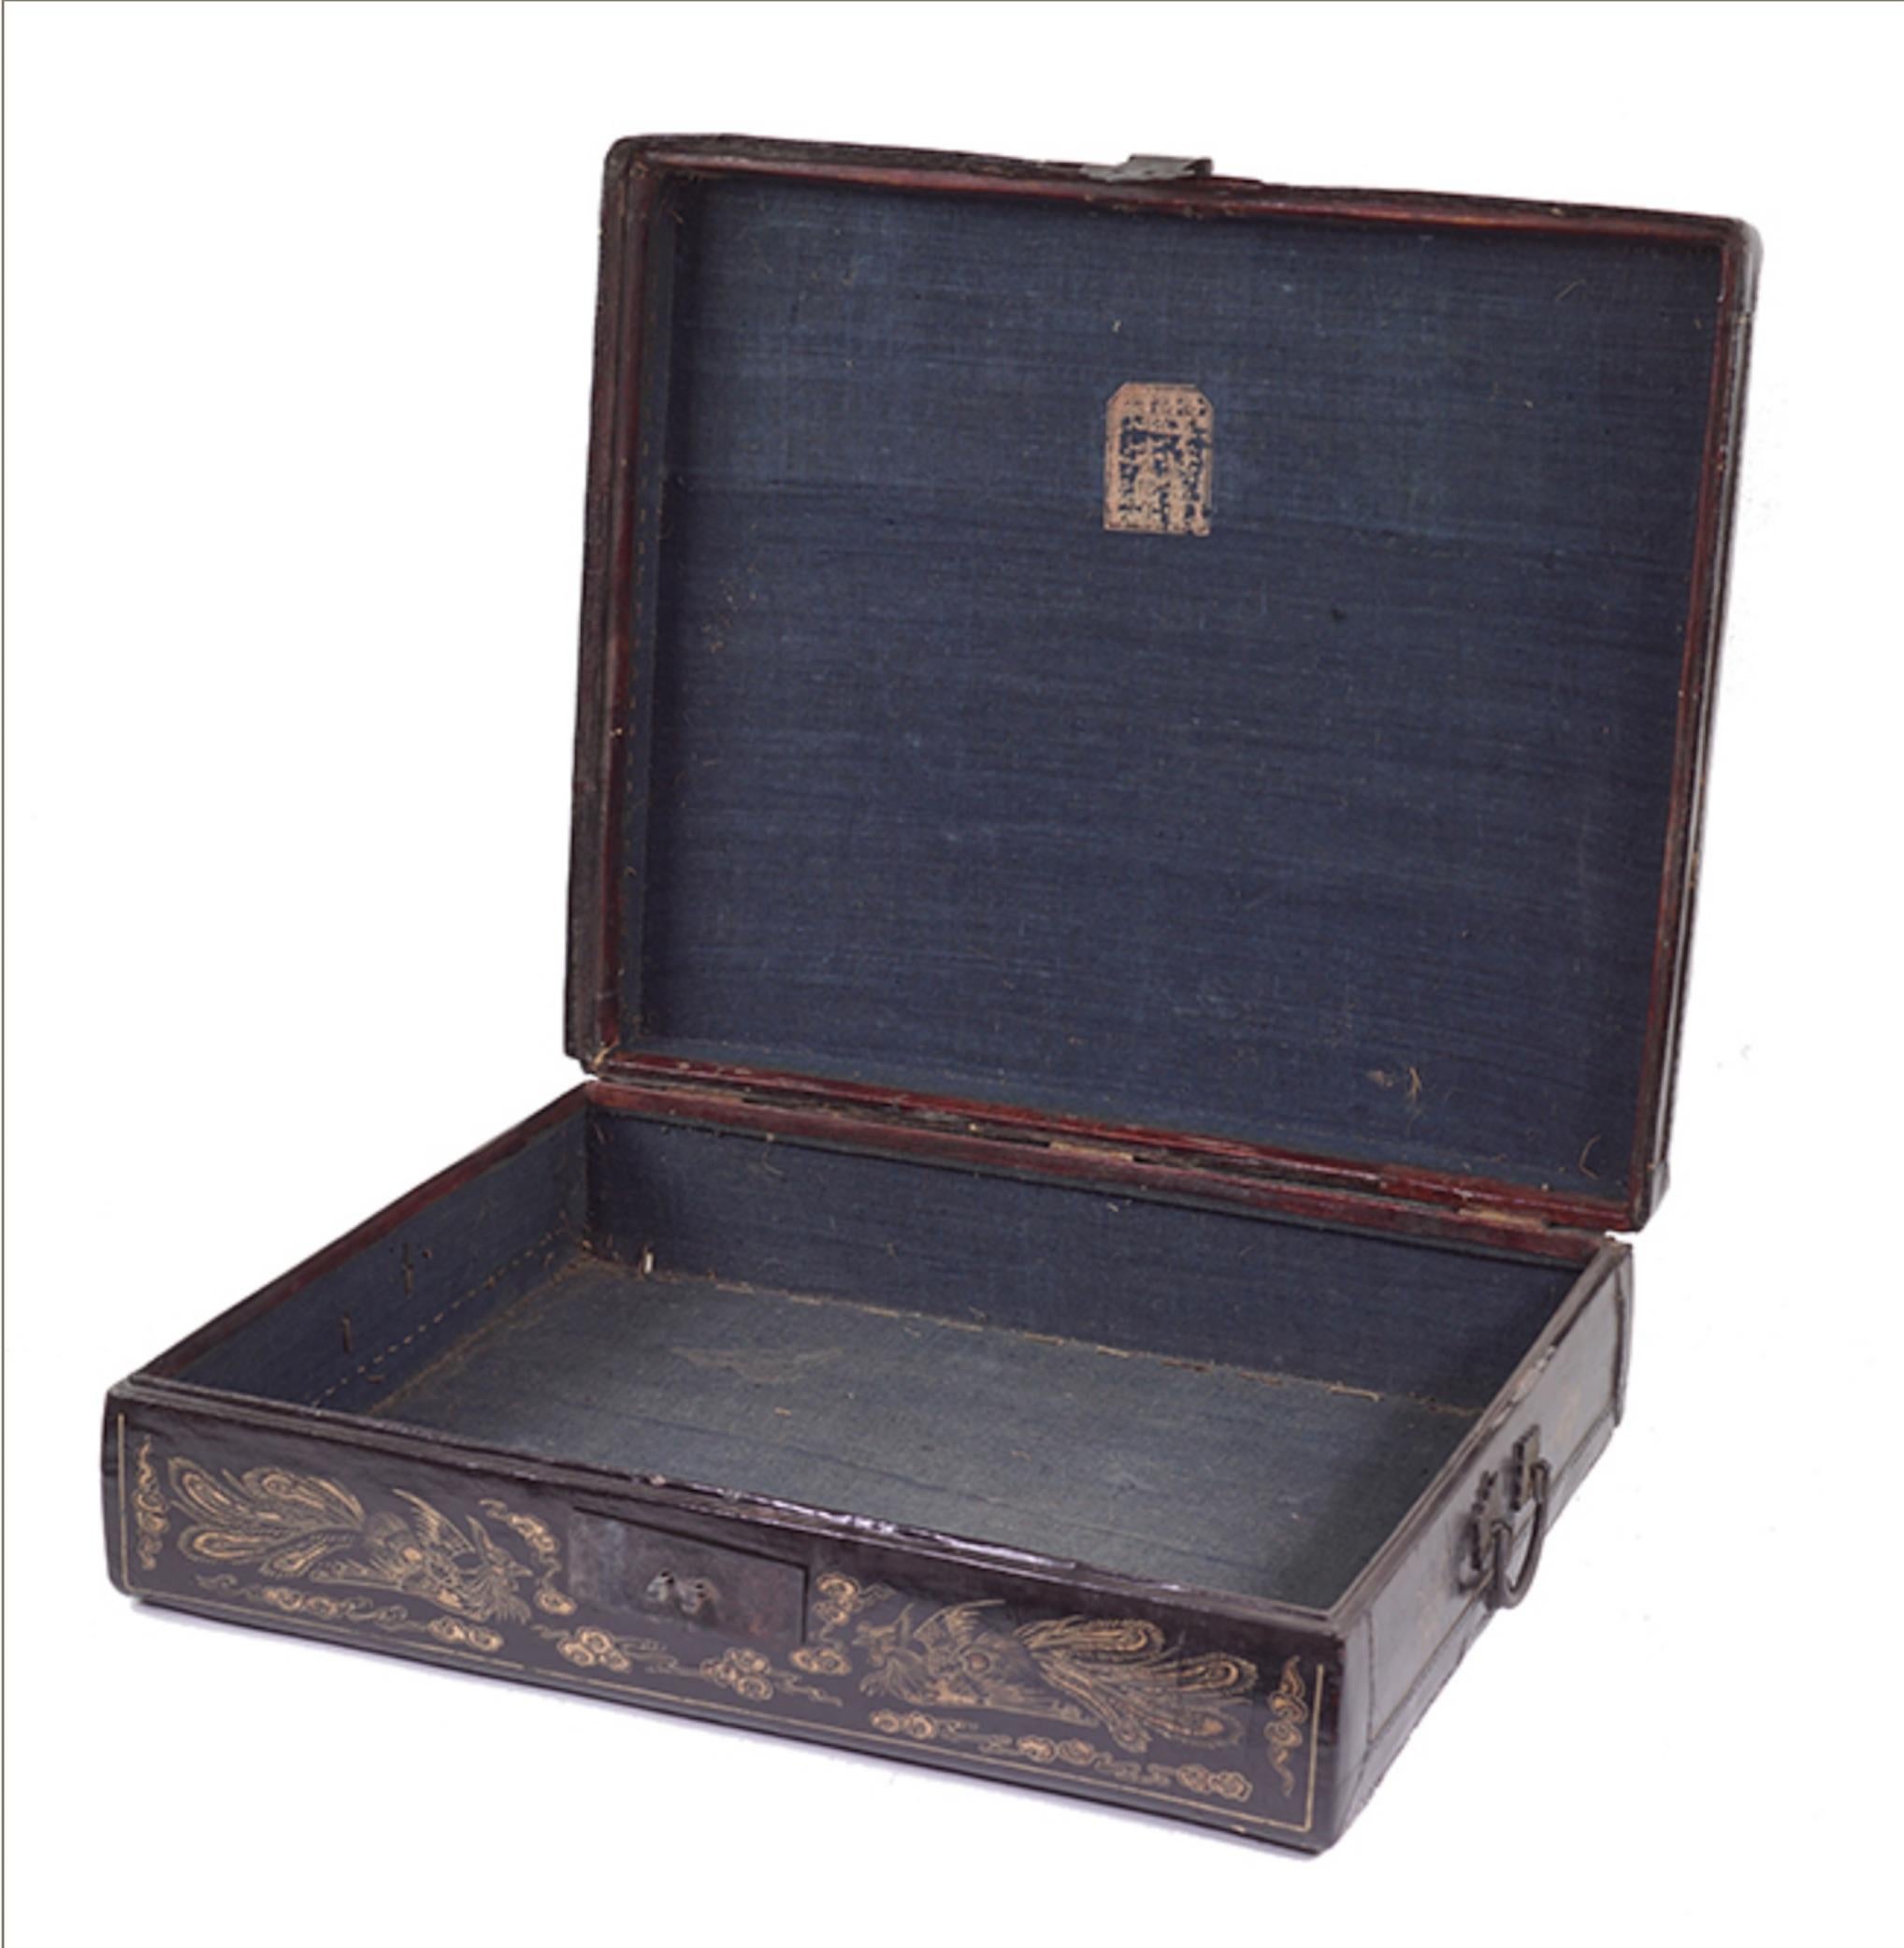 A 19th century Chinese box. Black lacquered rectangular double handled box with gilt decoration throughout 7